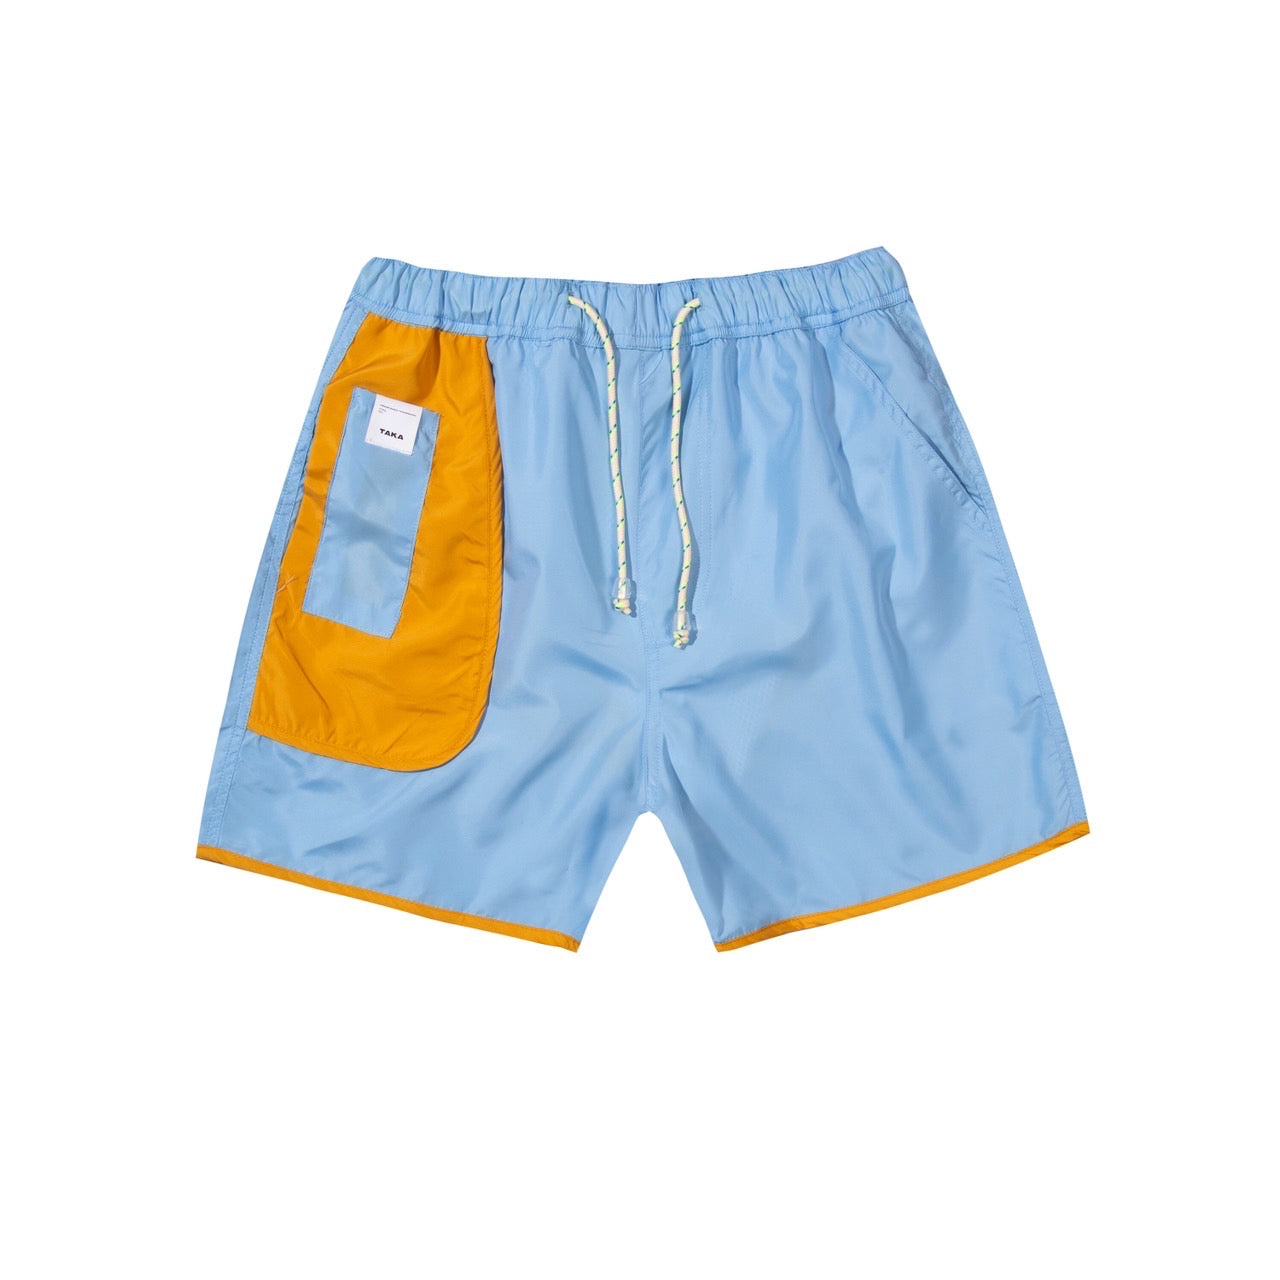 TAKA X Tale Of Two - Buggy Swimshorts Sandcastle